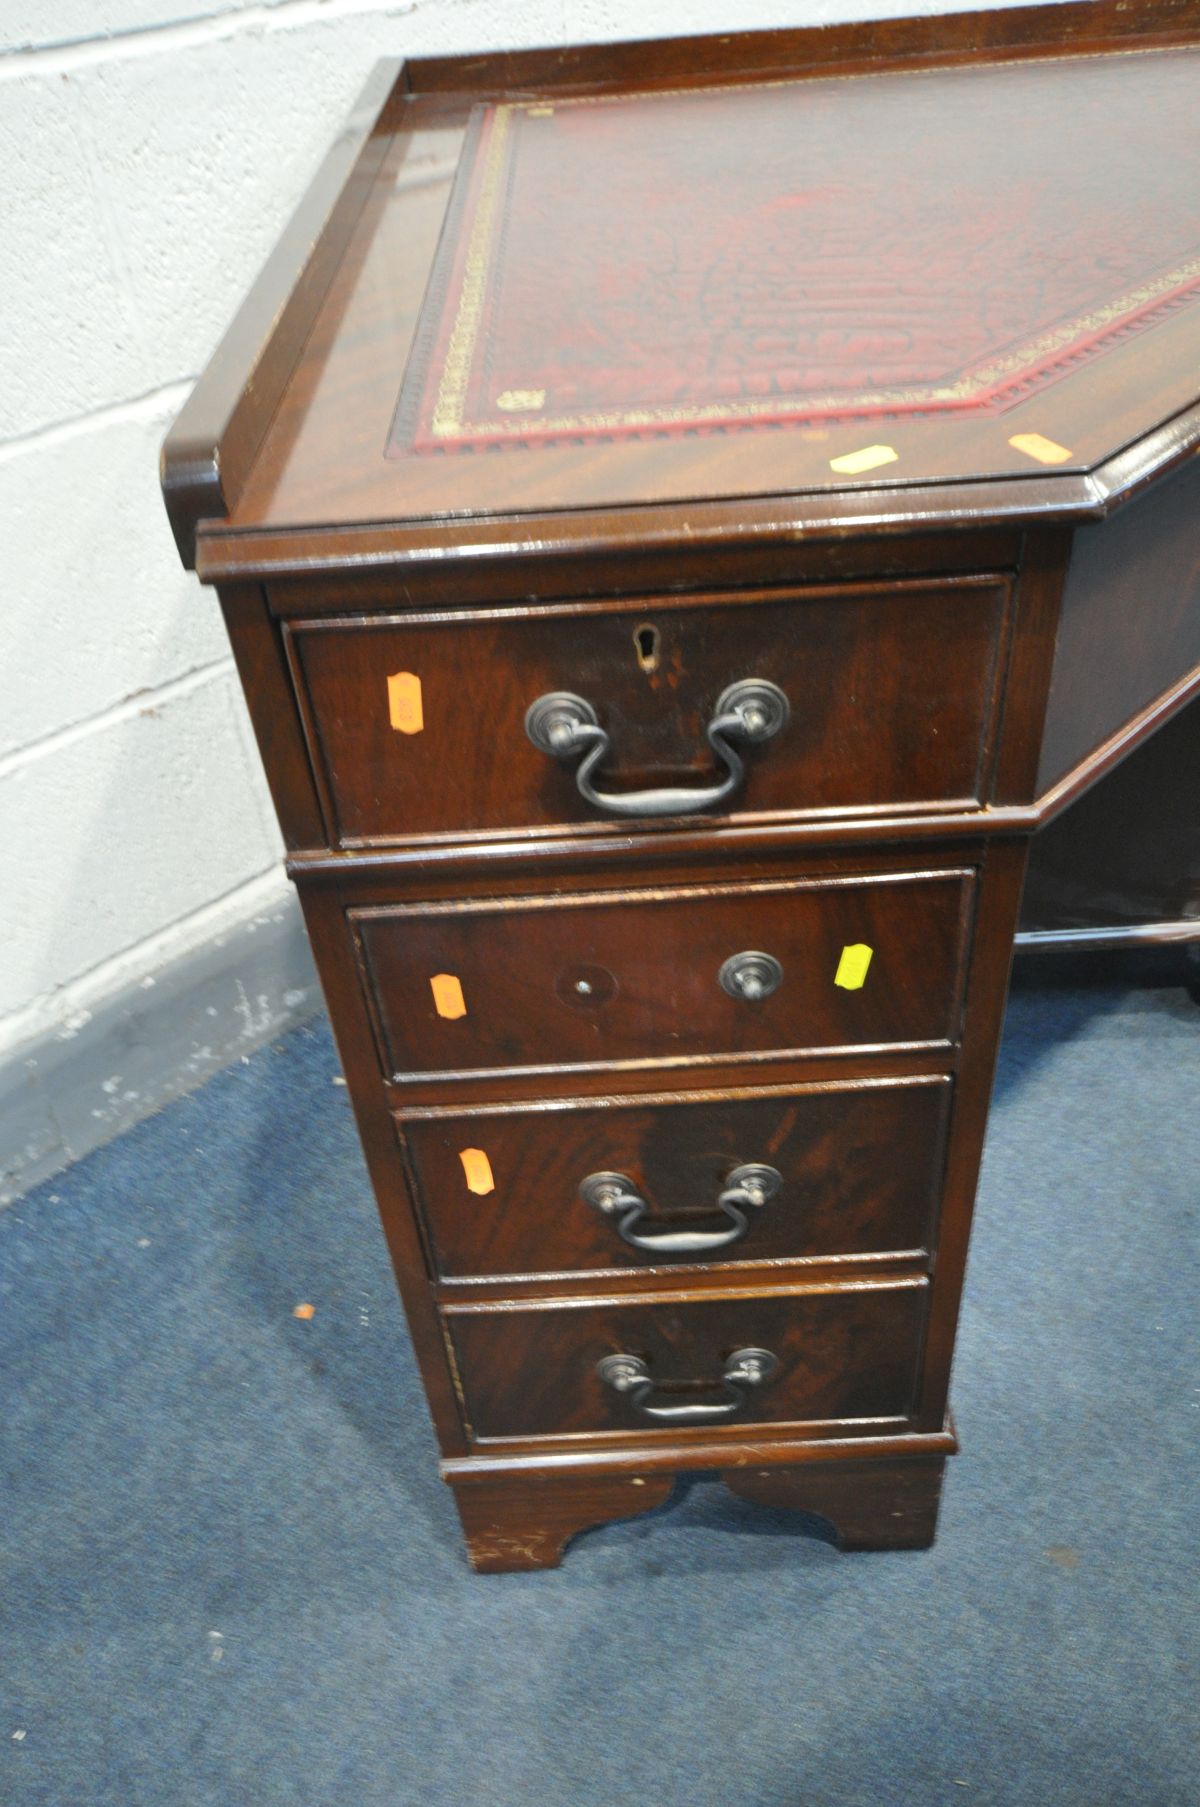 A MAHOGANY CORNER PEDESTAL DESK, with a burgundy leather and gilt tooled inlay top, and an - Image 3 of 3